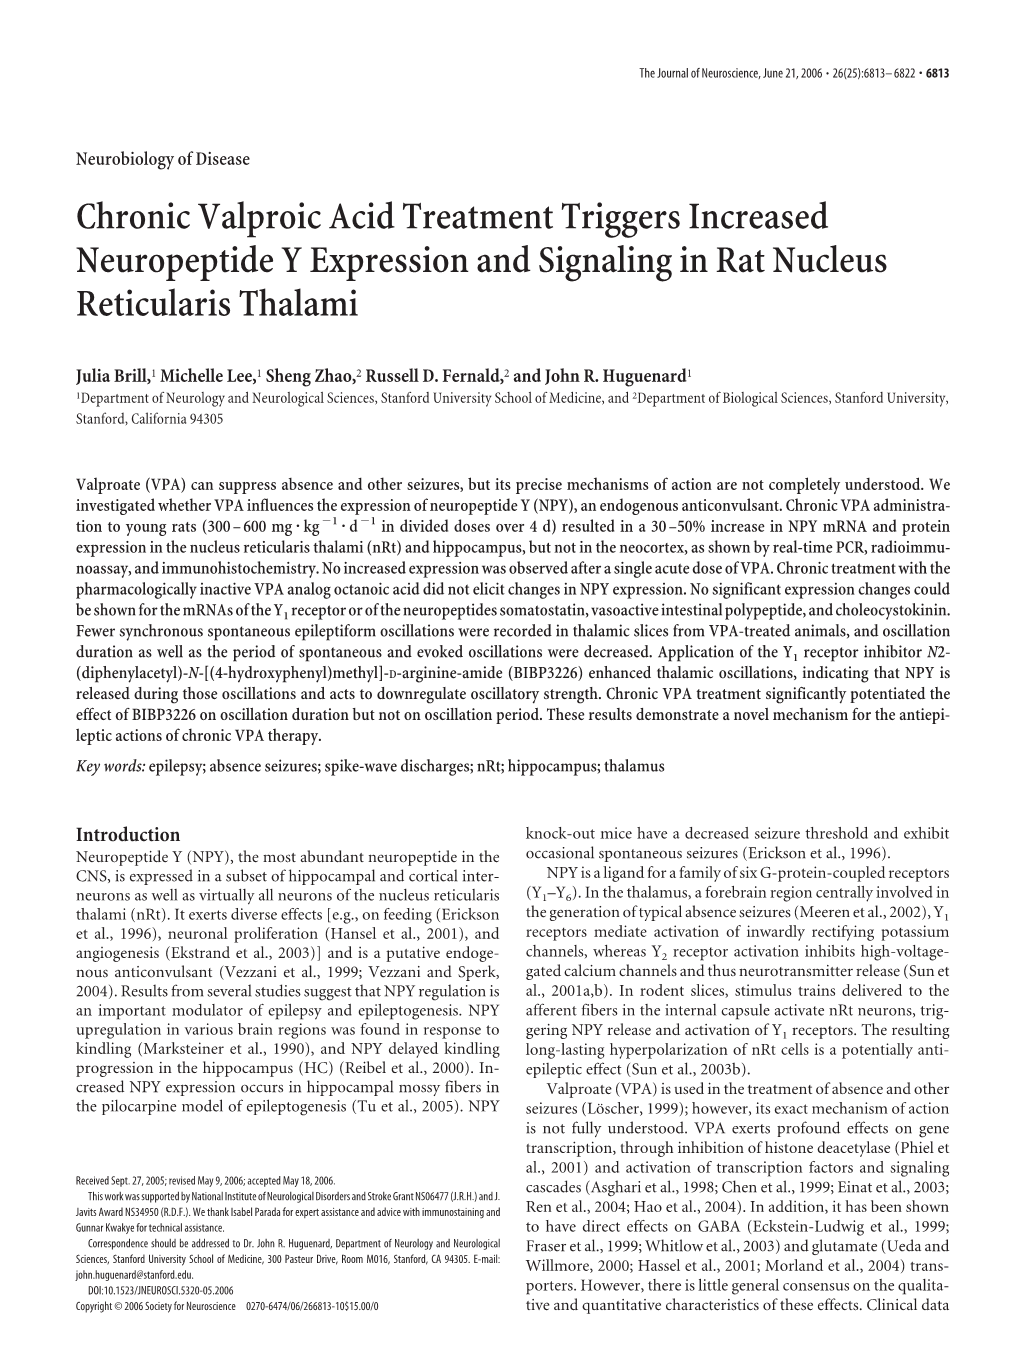 Chronic Valproic Acid Treatment Triggers Increased Neuropeptide Y Expression and Signaling in Rat Nucleus Reticularis Thalami